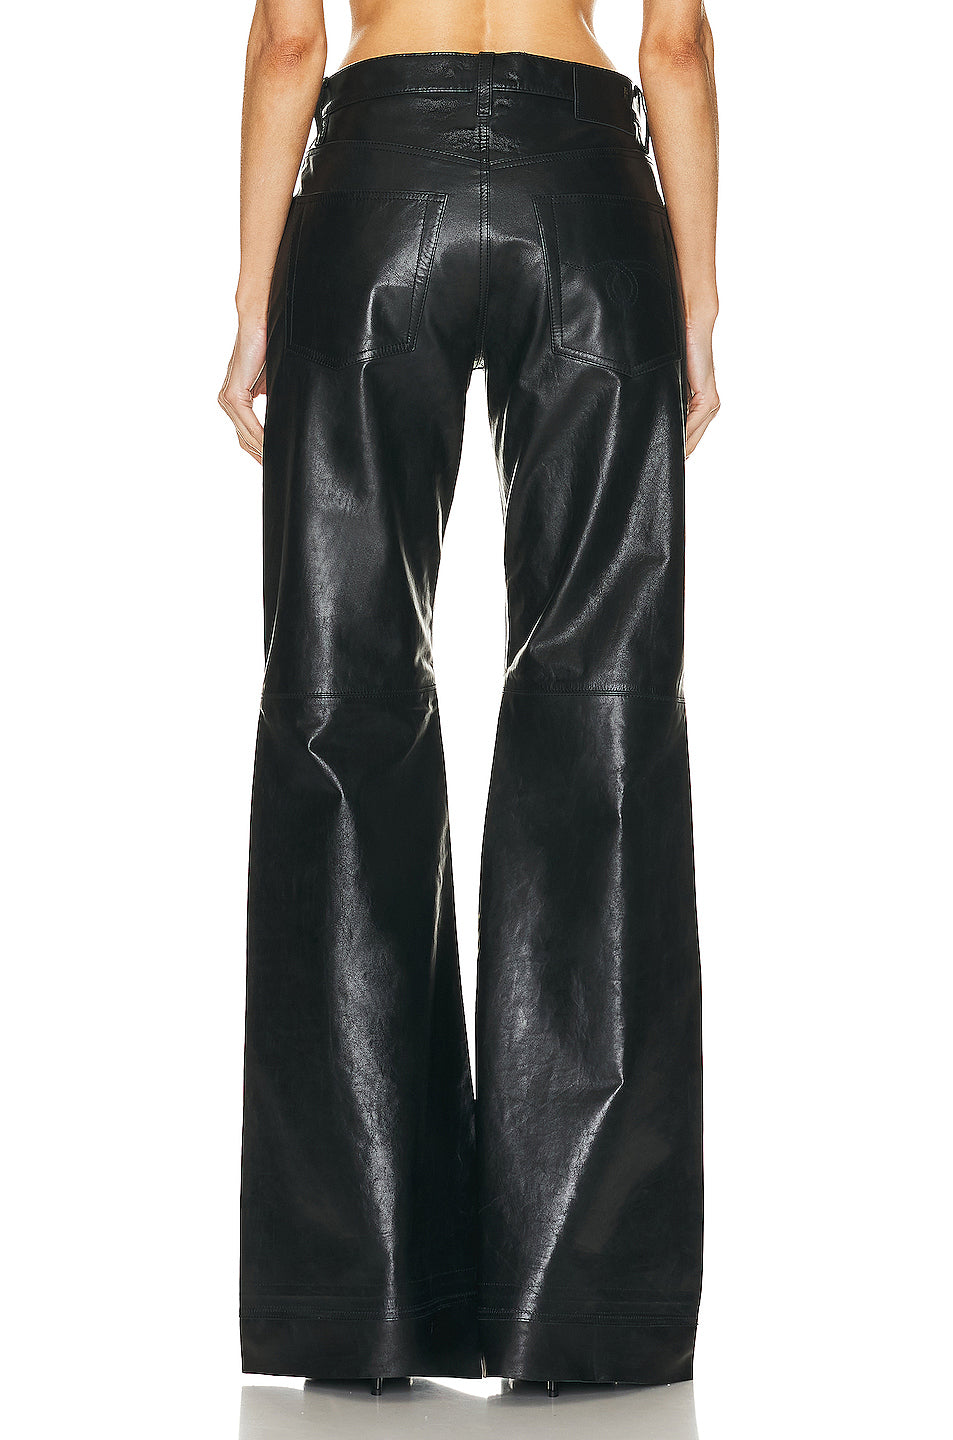 Janet Relaxed Flair Leather Pant